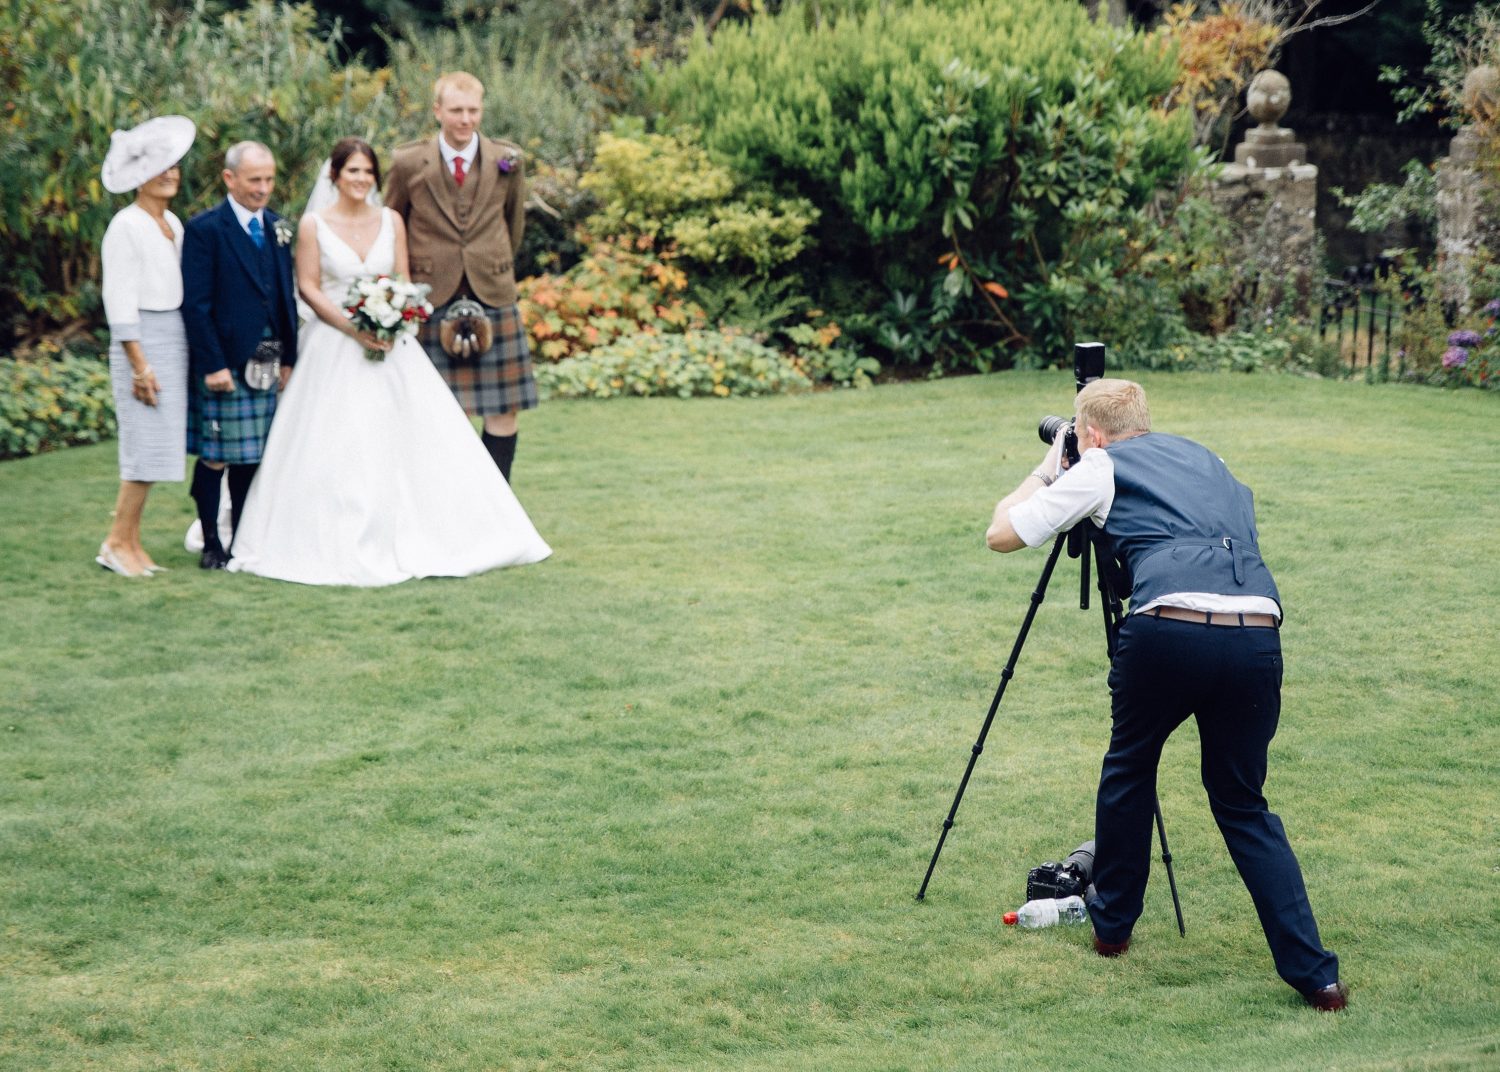 Inverness wedding photographer photographing wedding party